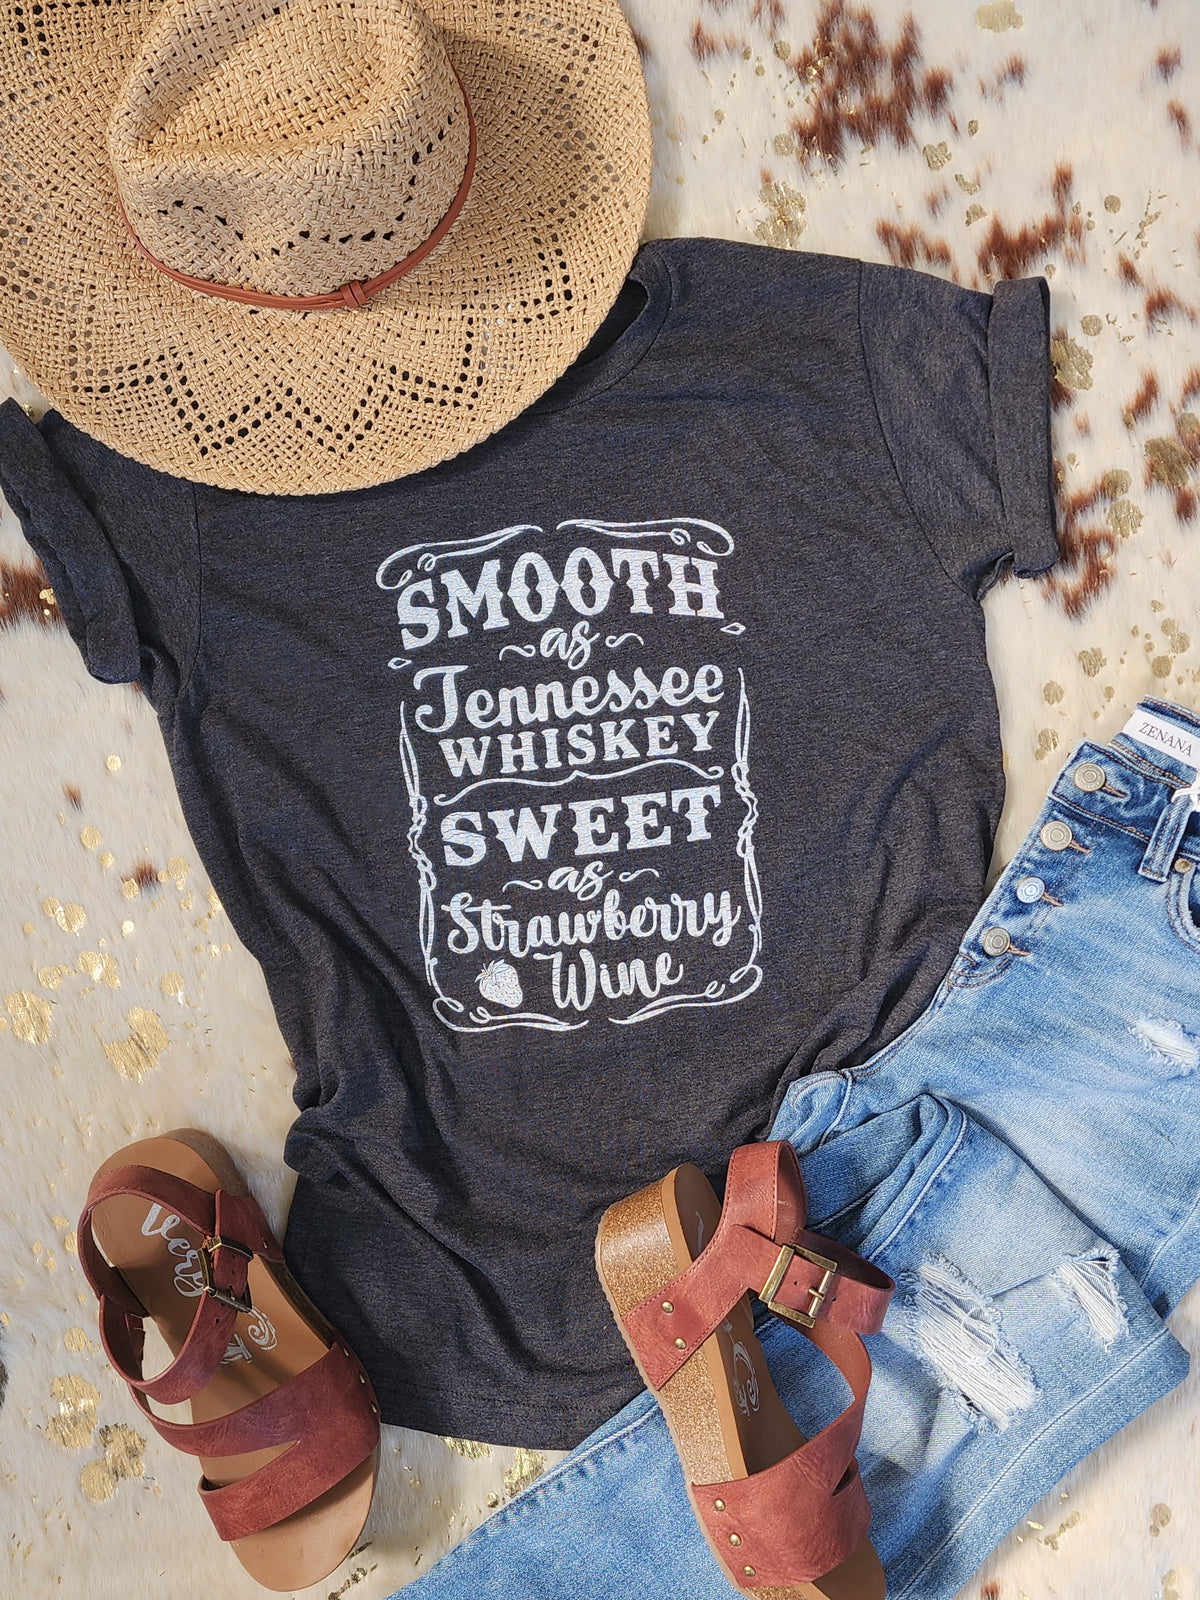 Smooth as Tennesee Whiskey, Sweet as Strawberry Wine" graphic tee